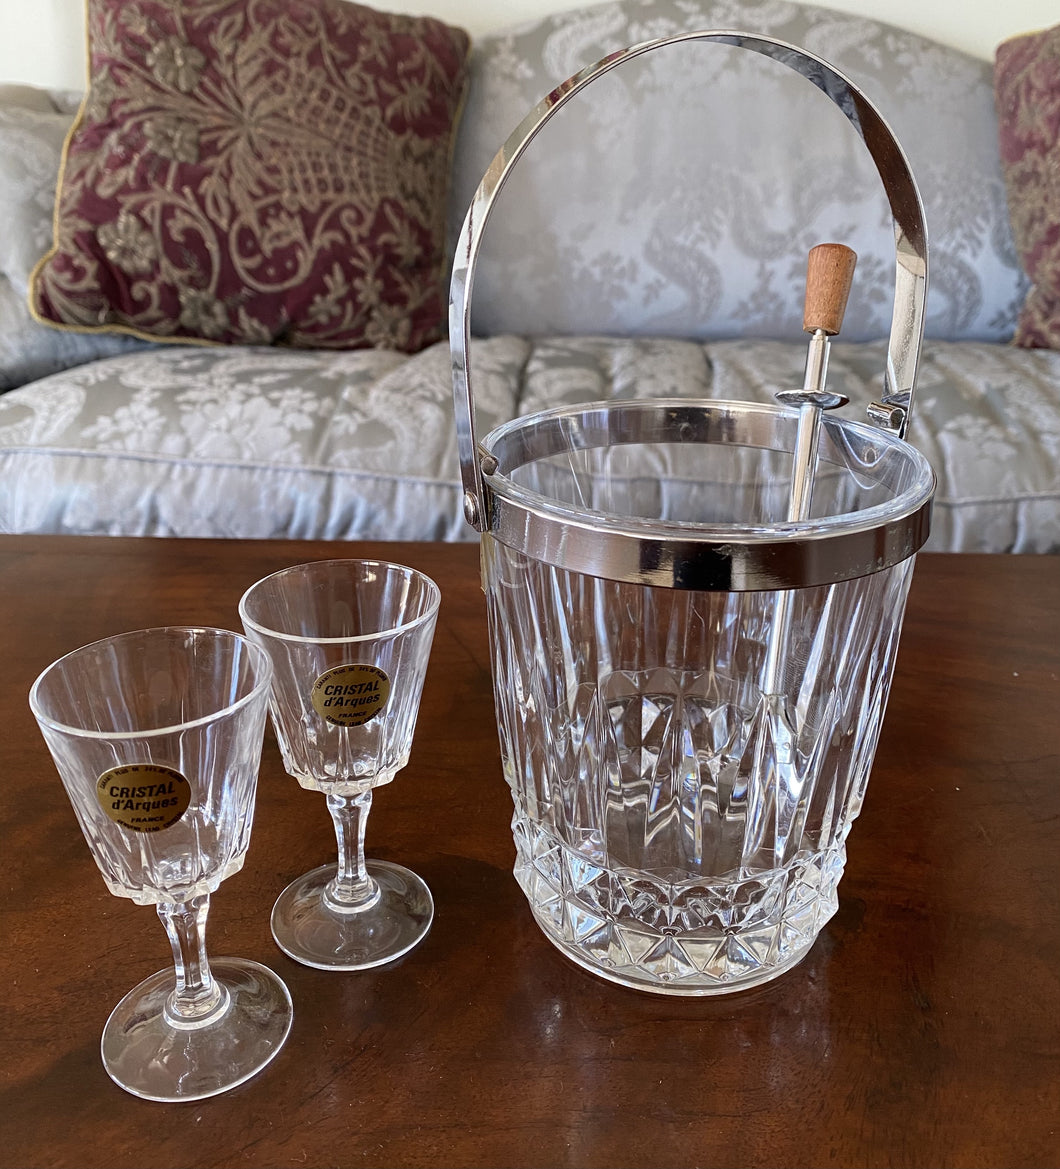 JP0005 Vintage 'Cristal de Arques' French Lead Crystal Ice Bucket with 6 Liquor Glasses